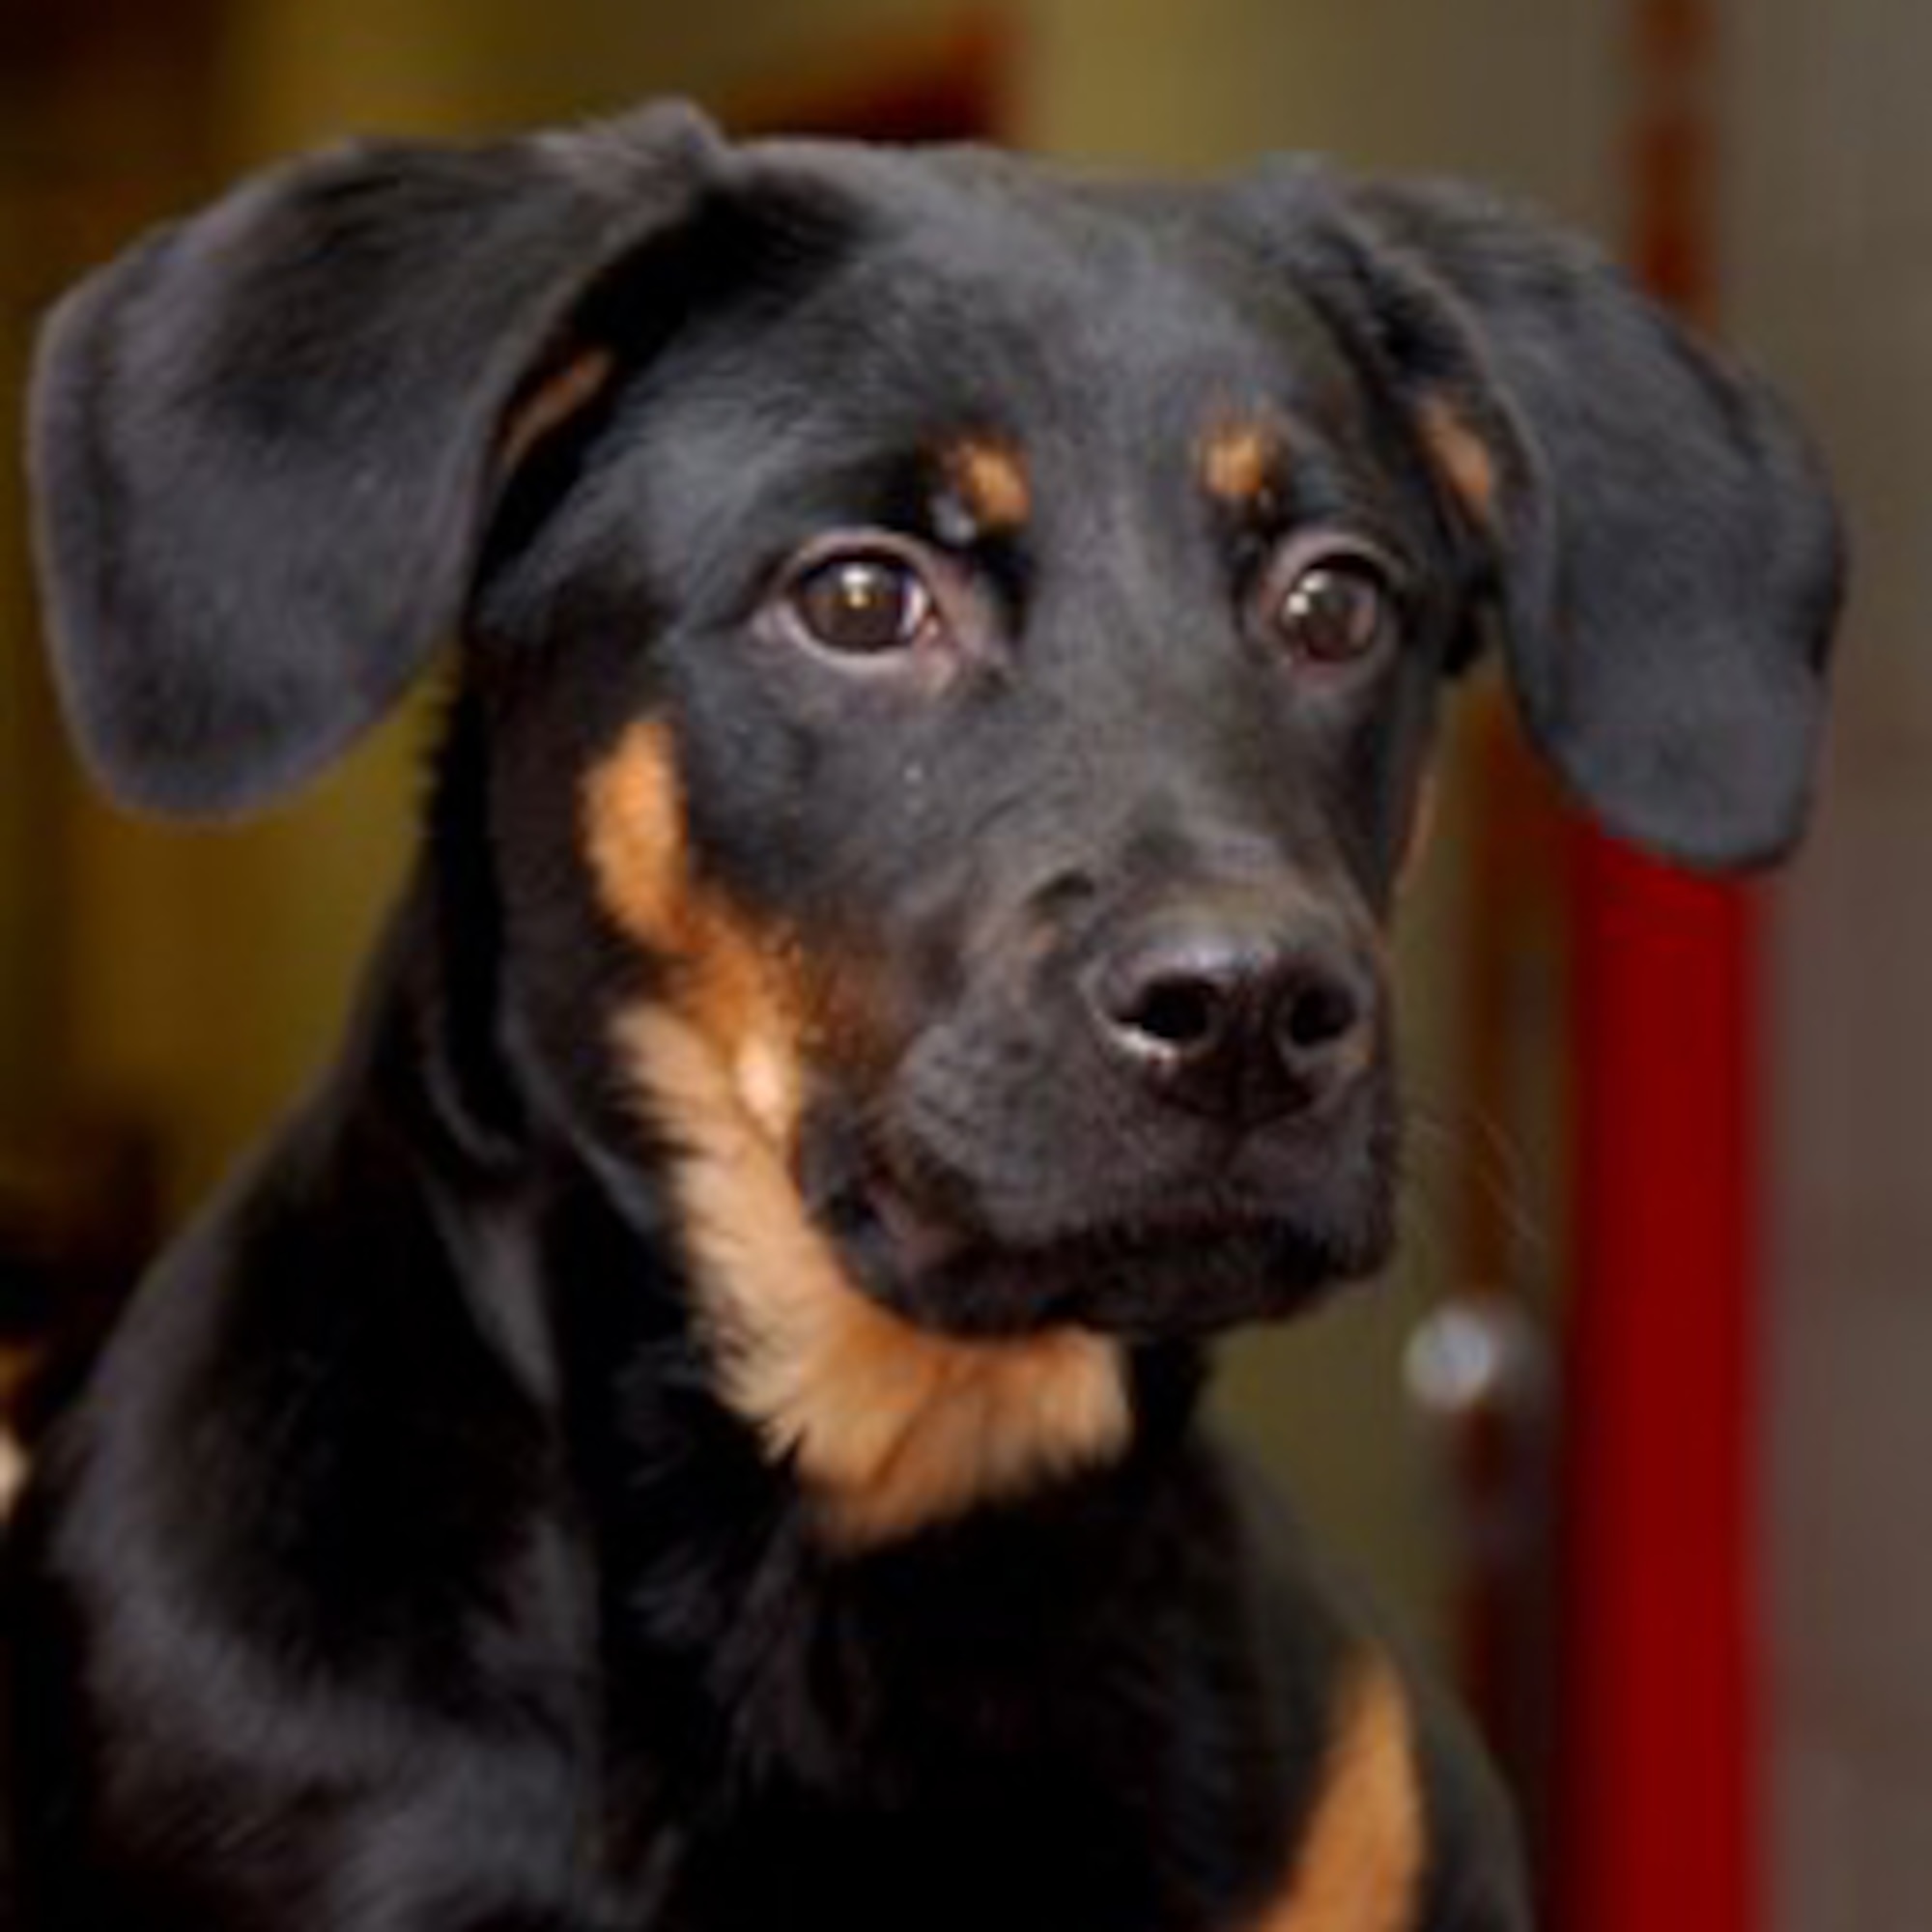 The Rottweiler is one of three breeds now banned from Ellsworth military family housing as of July 26. The other two banned breeds are the Pit Bull and Doberman pinscher. Those found not in compliance with the new regulations are subject to removal from military family housing at their own expense. (Courtesy photo/www.franklincountyohio.gov) 